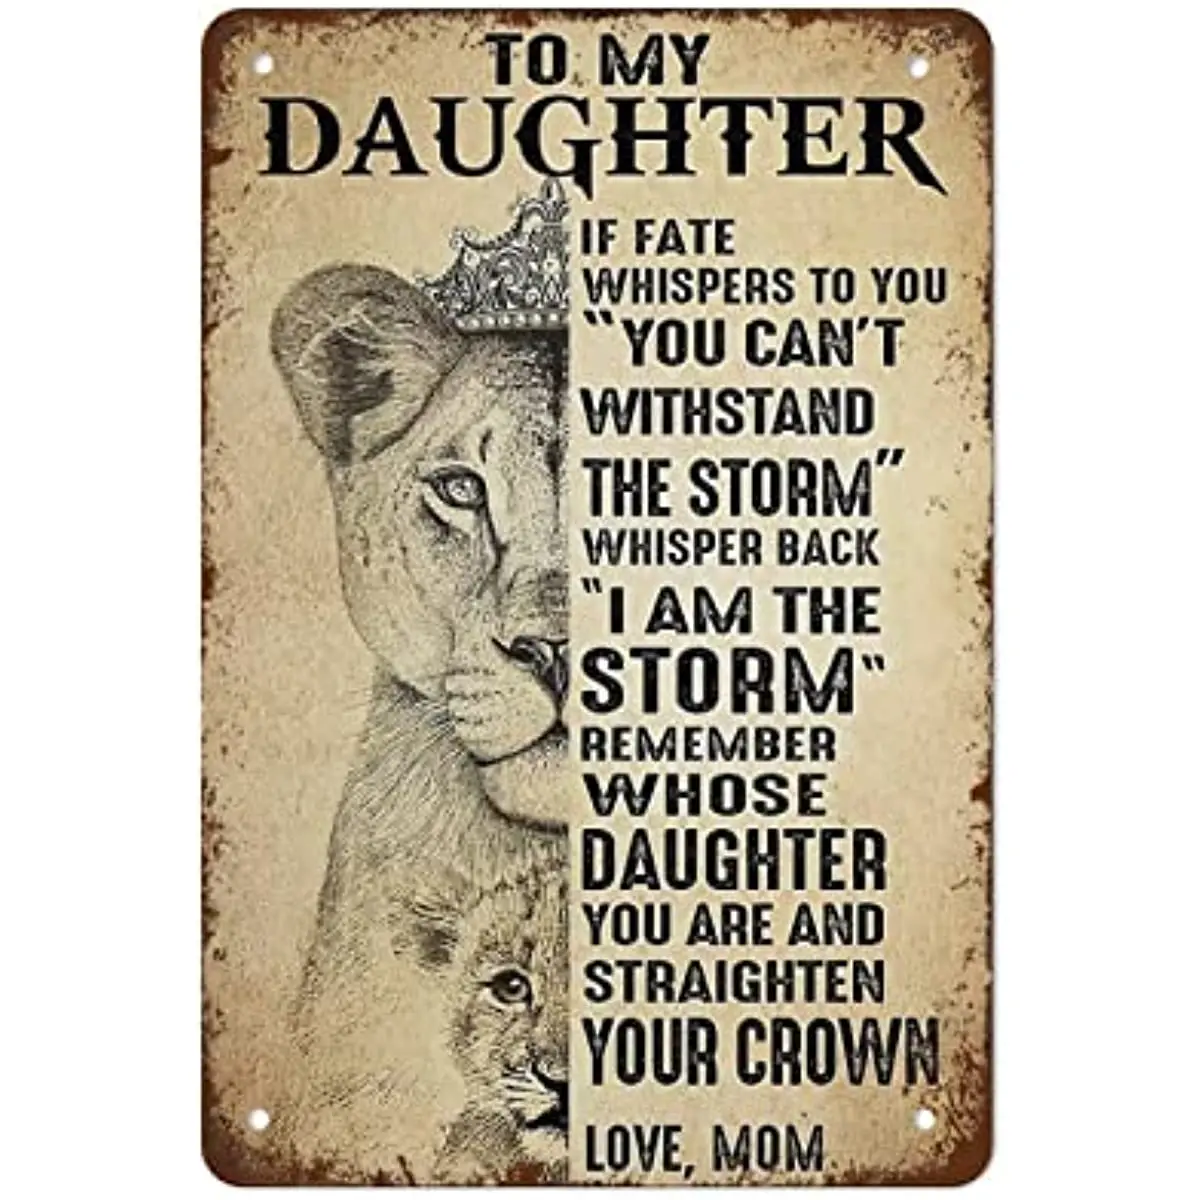 

New Lion to My Daughter Poster You Can't Withstand The Storm Whisper Back I Am The Storm Vintage Poster Mother Daughter Gift